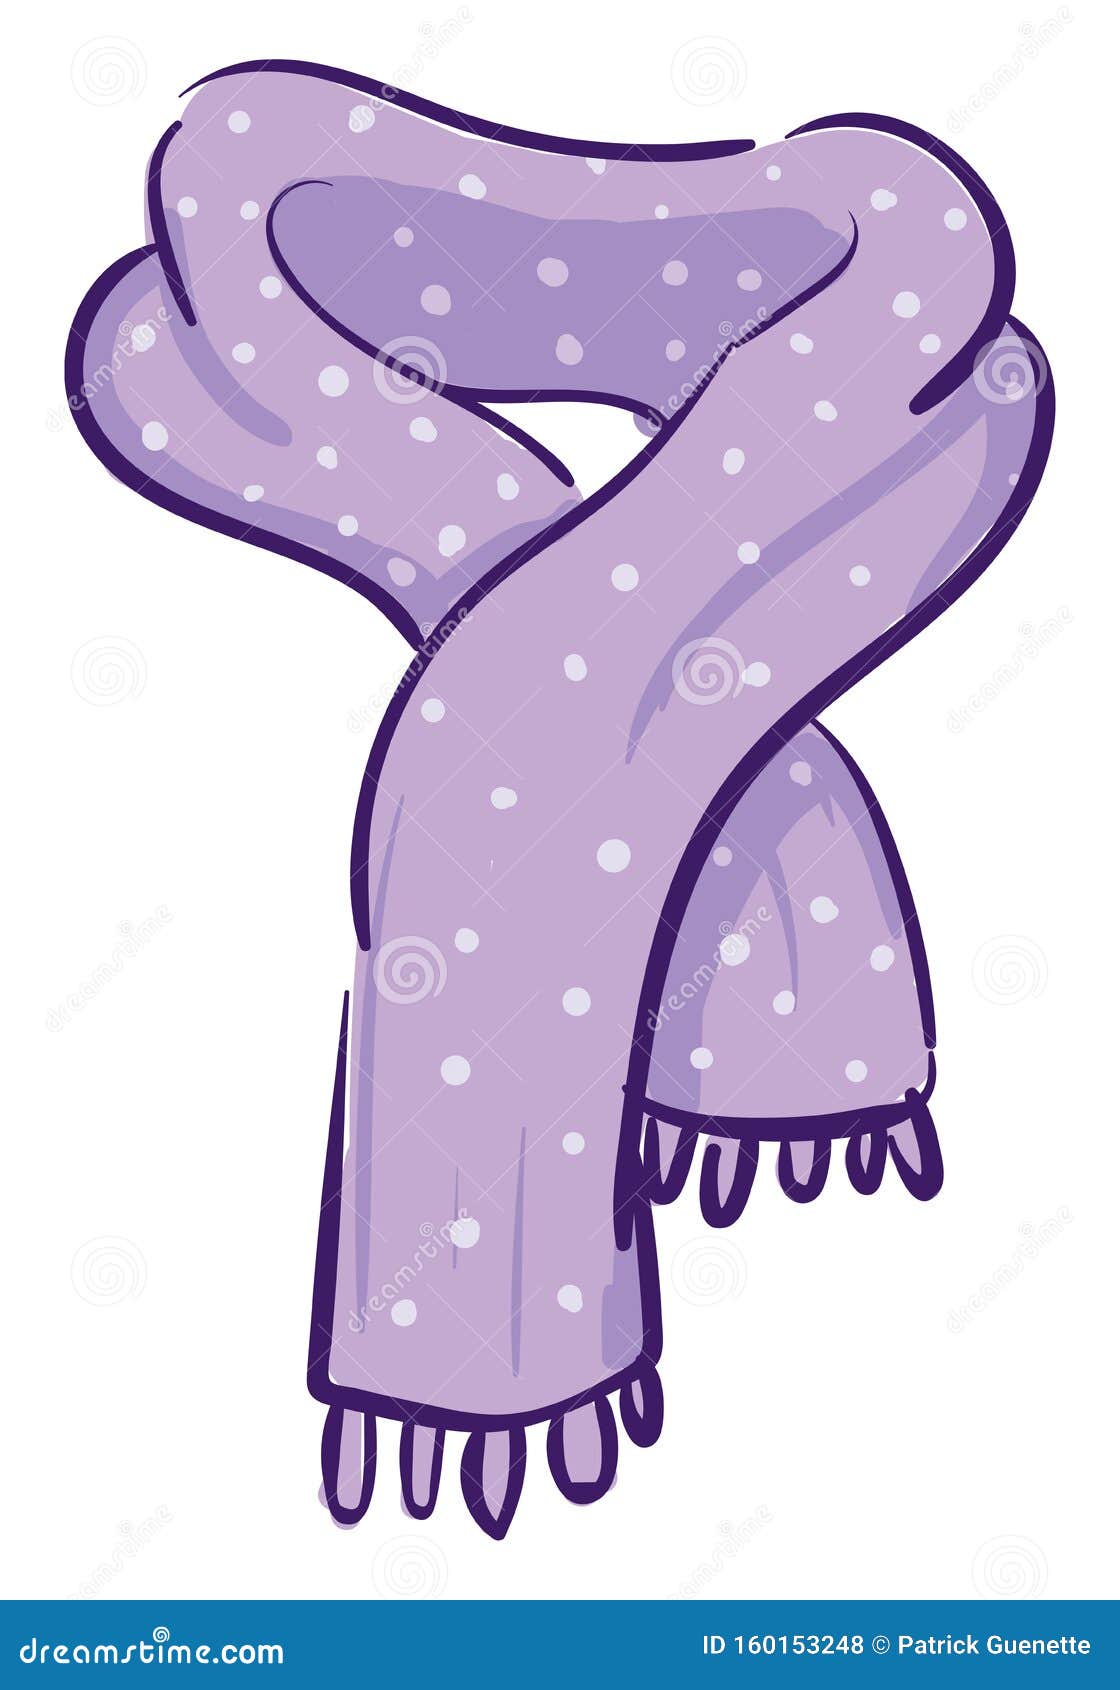 Clipart of a Purple Scarf with White Polka Design Vector or Color  Illustration Stock Vector - Illustration of white, clothes: 160153248